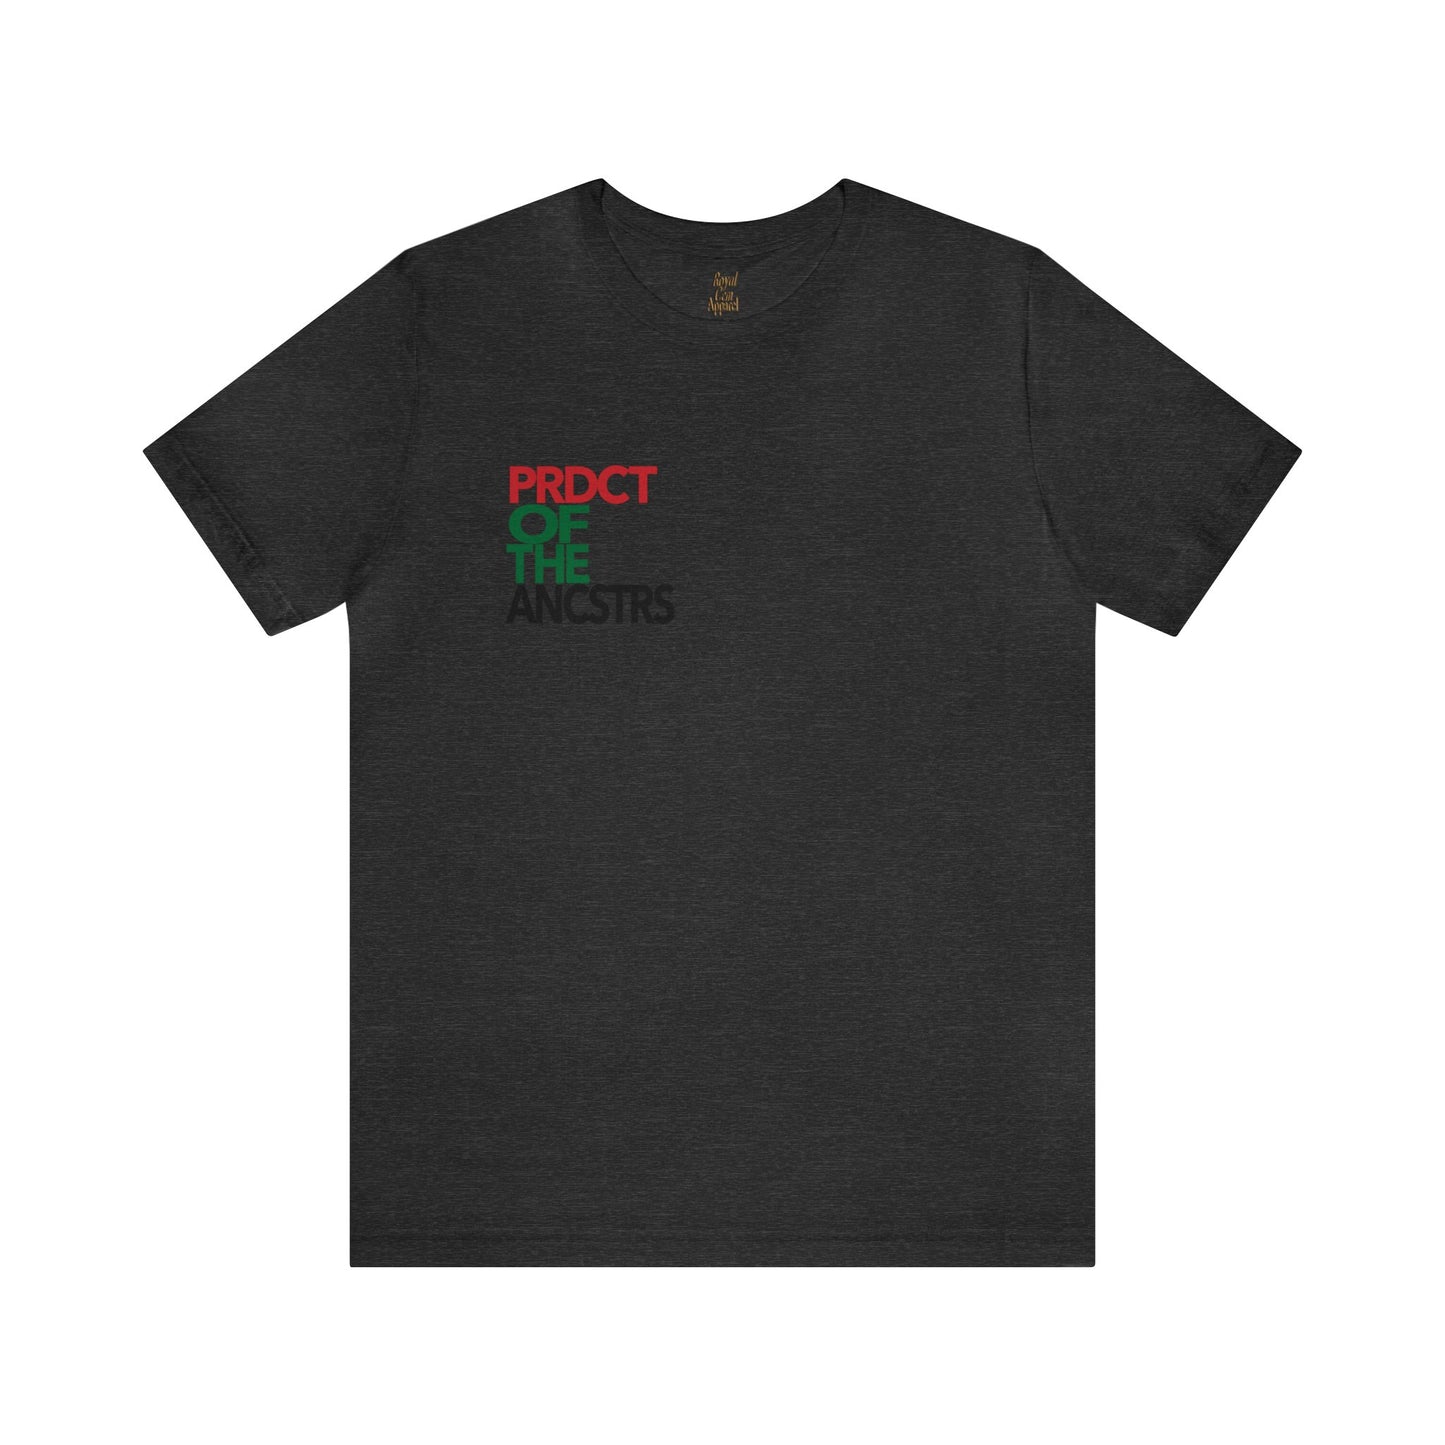 "Product of The Ancestors" Tee